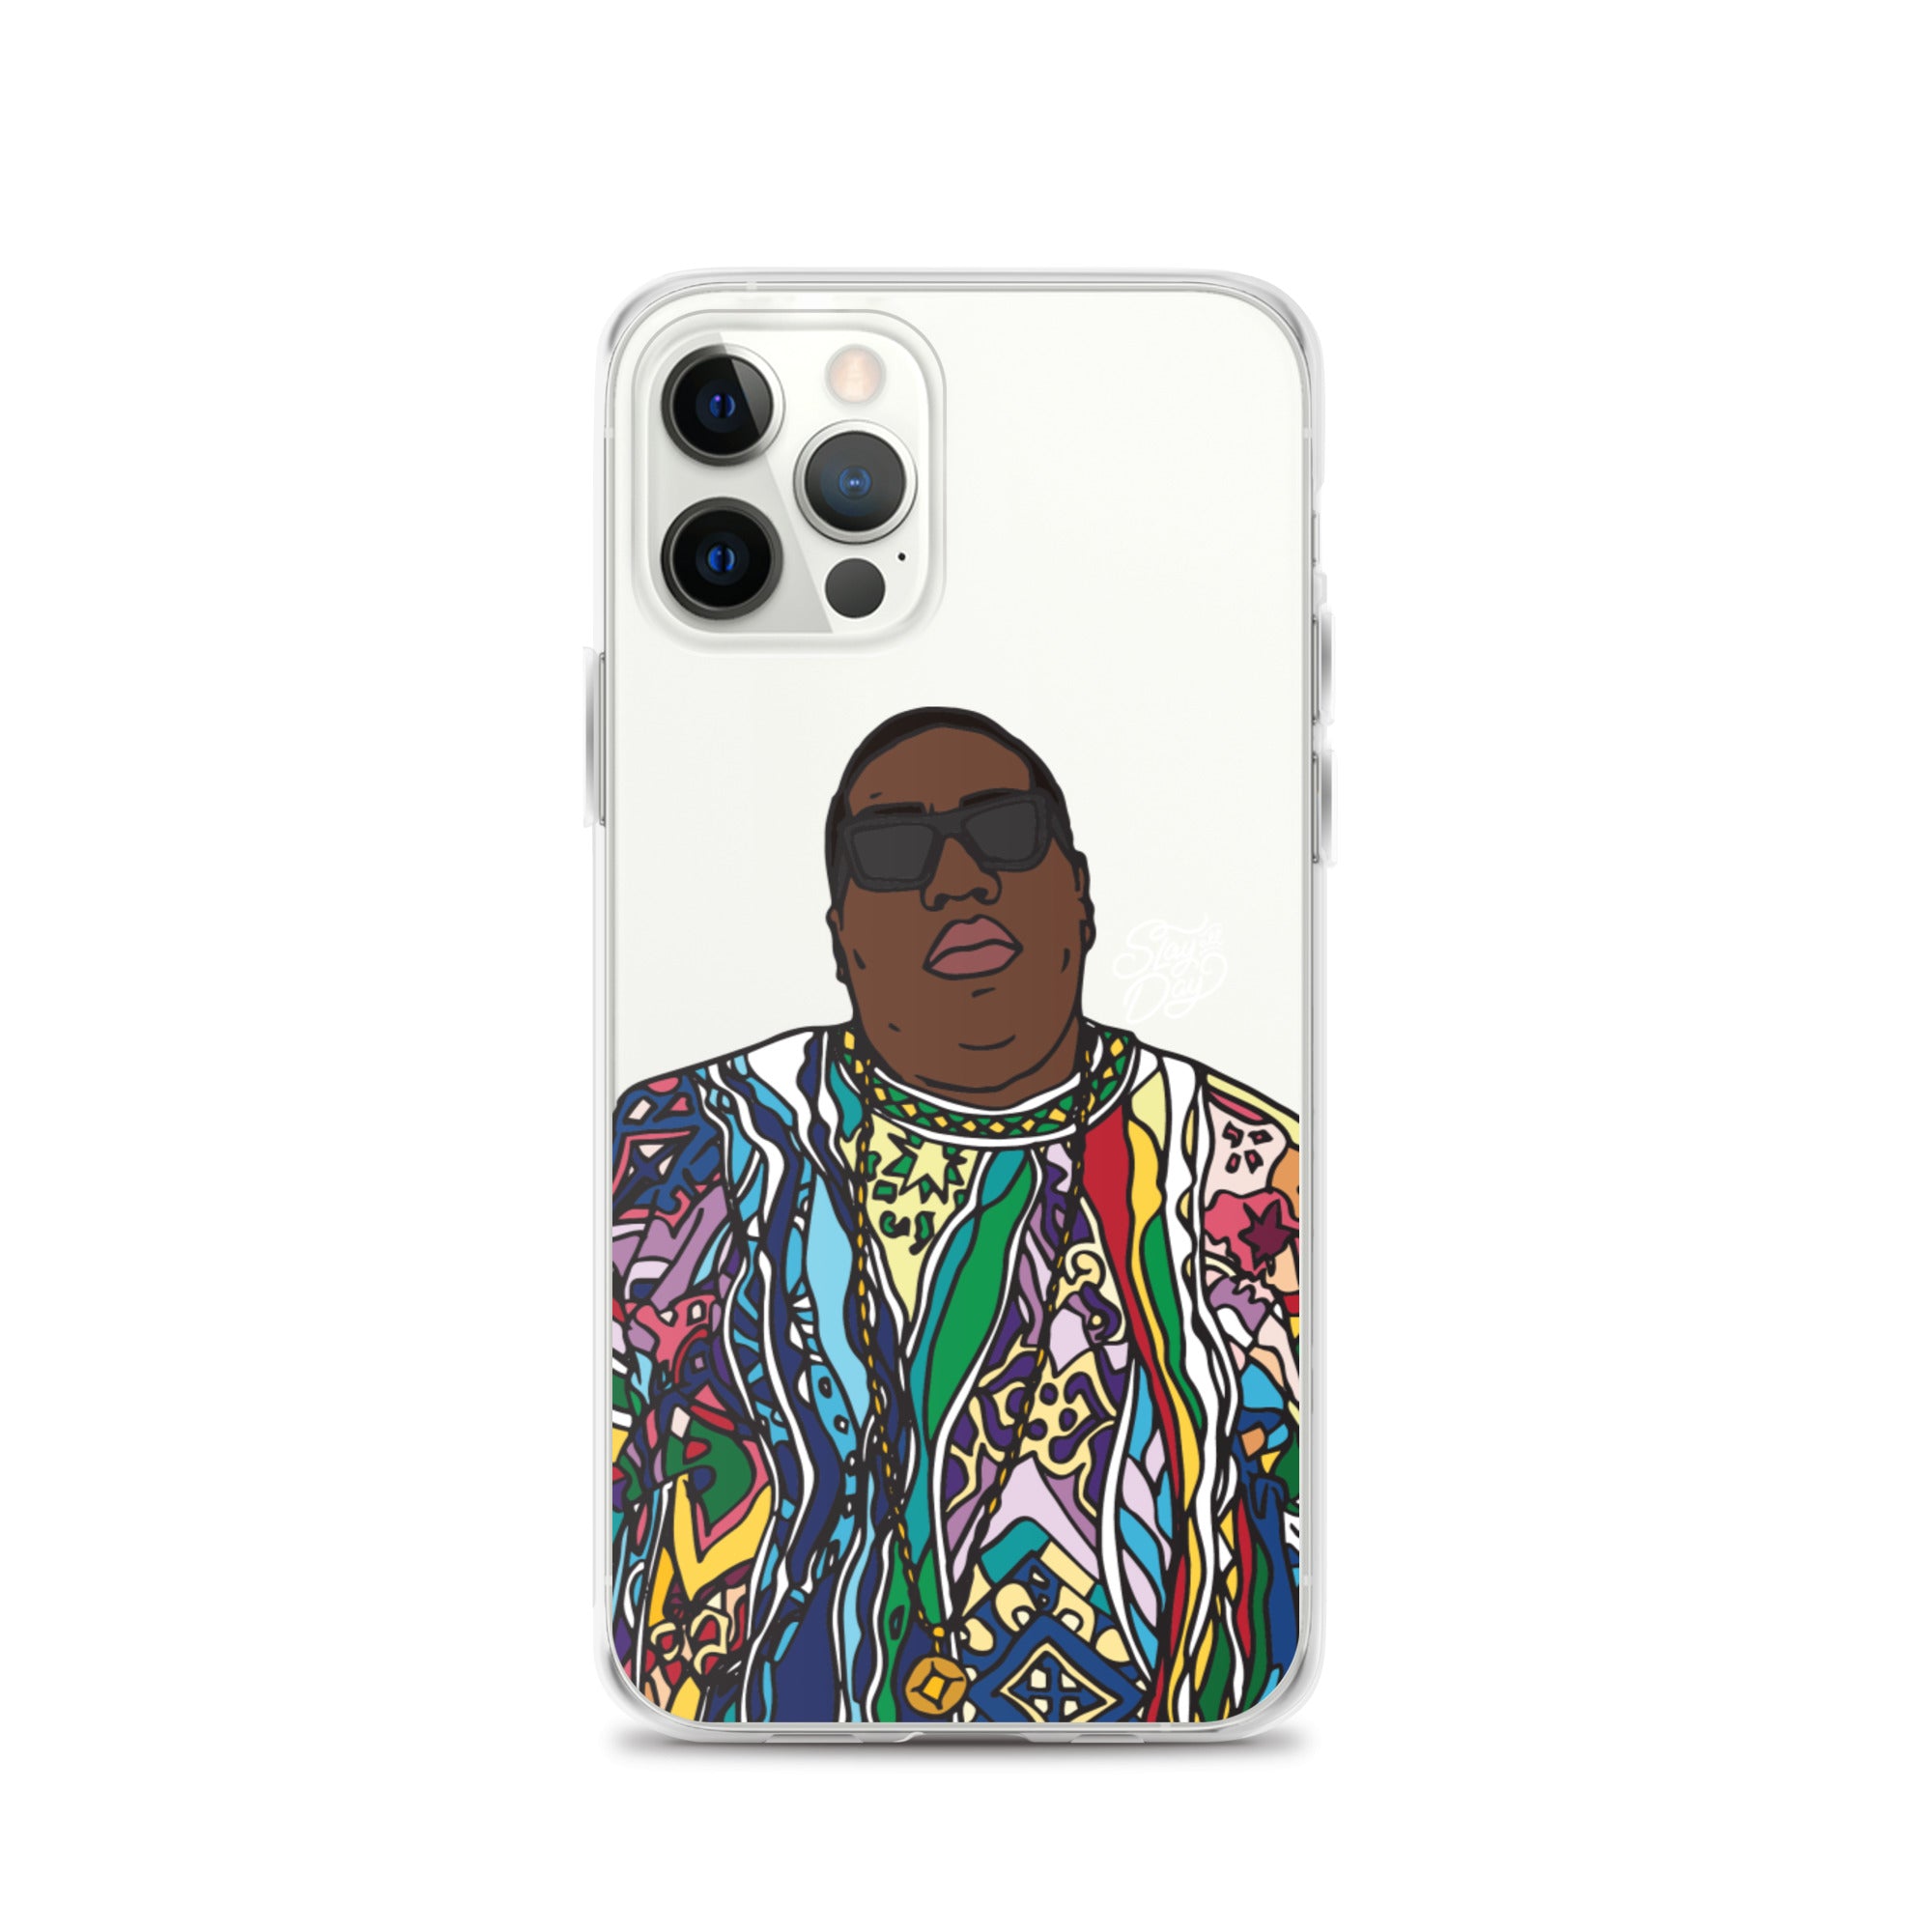 Notorious B.I.G. - iPhone Case